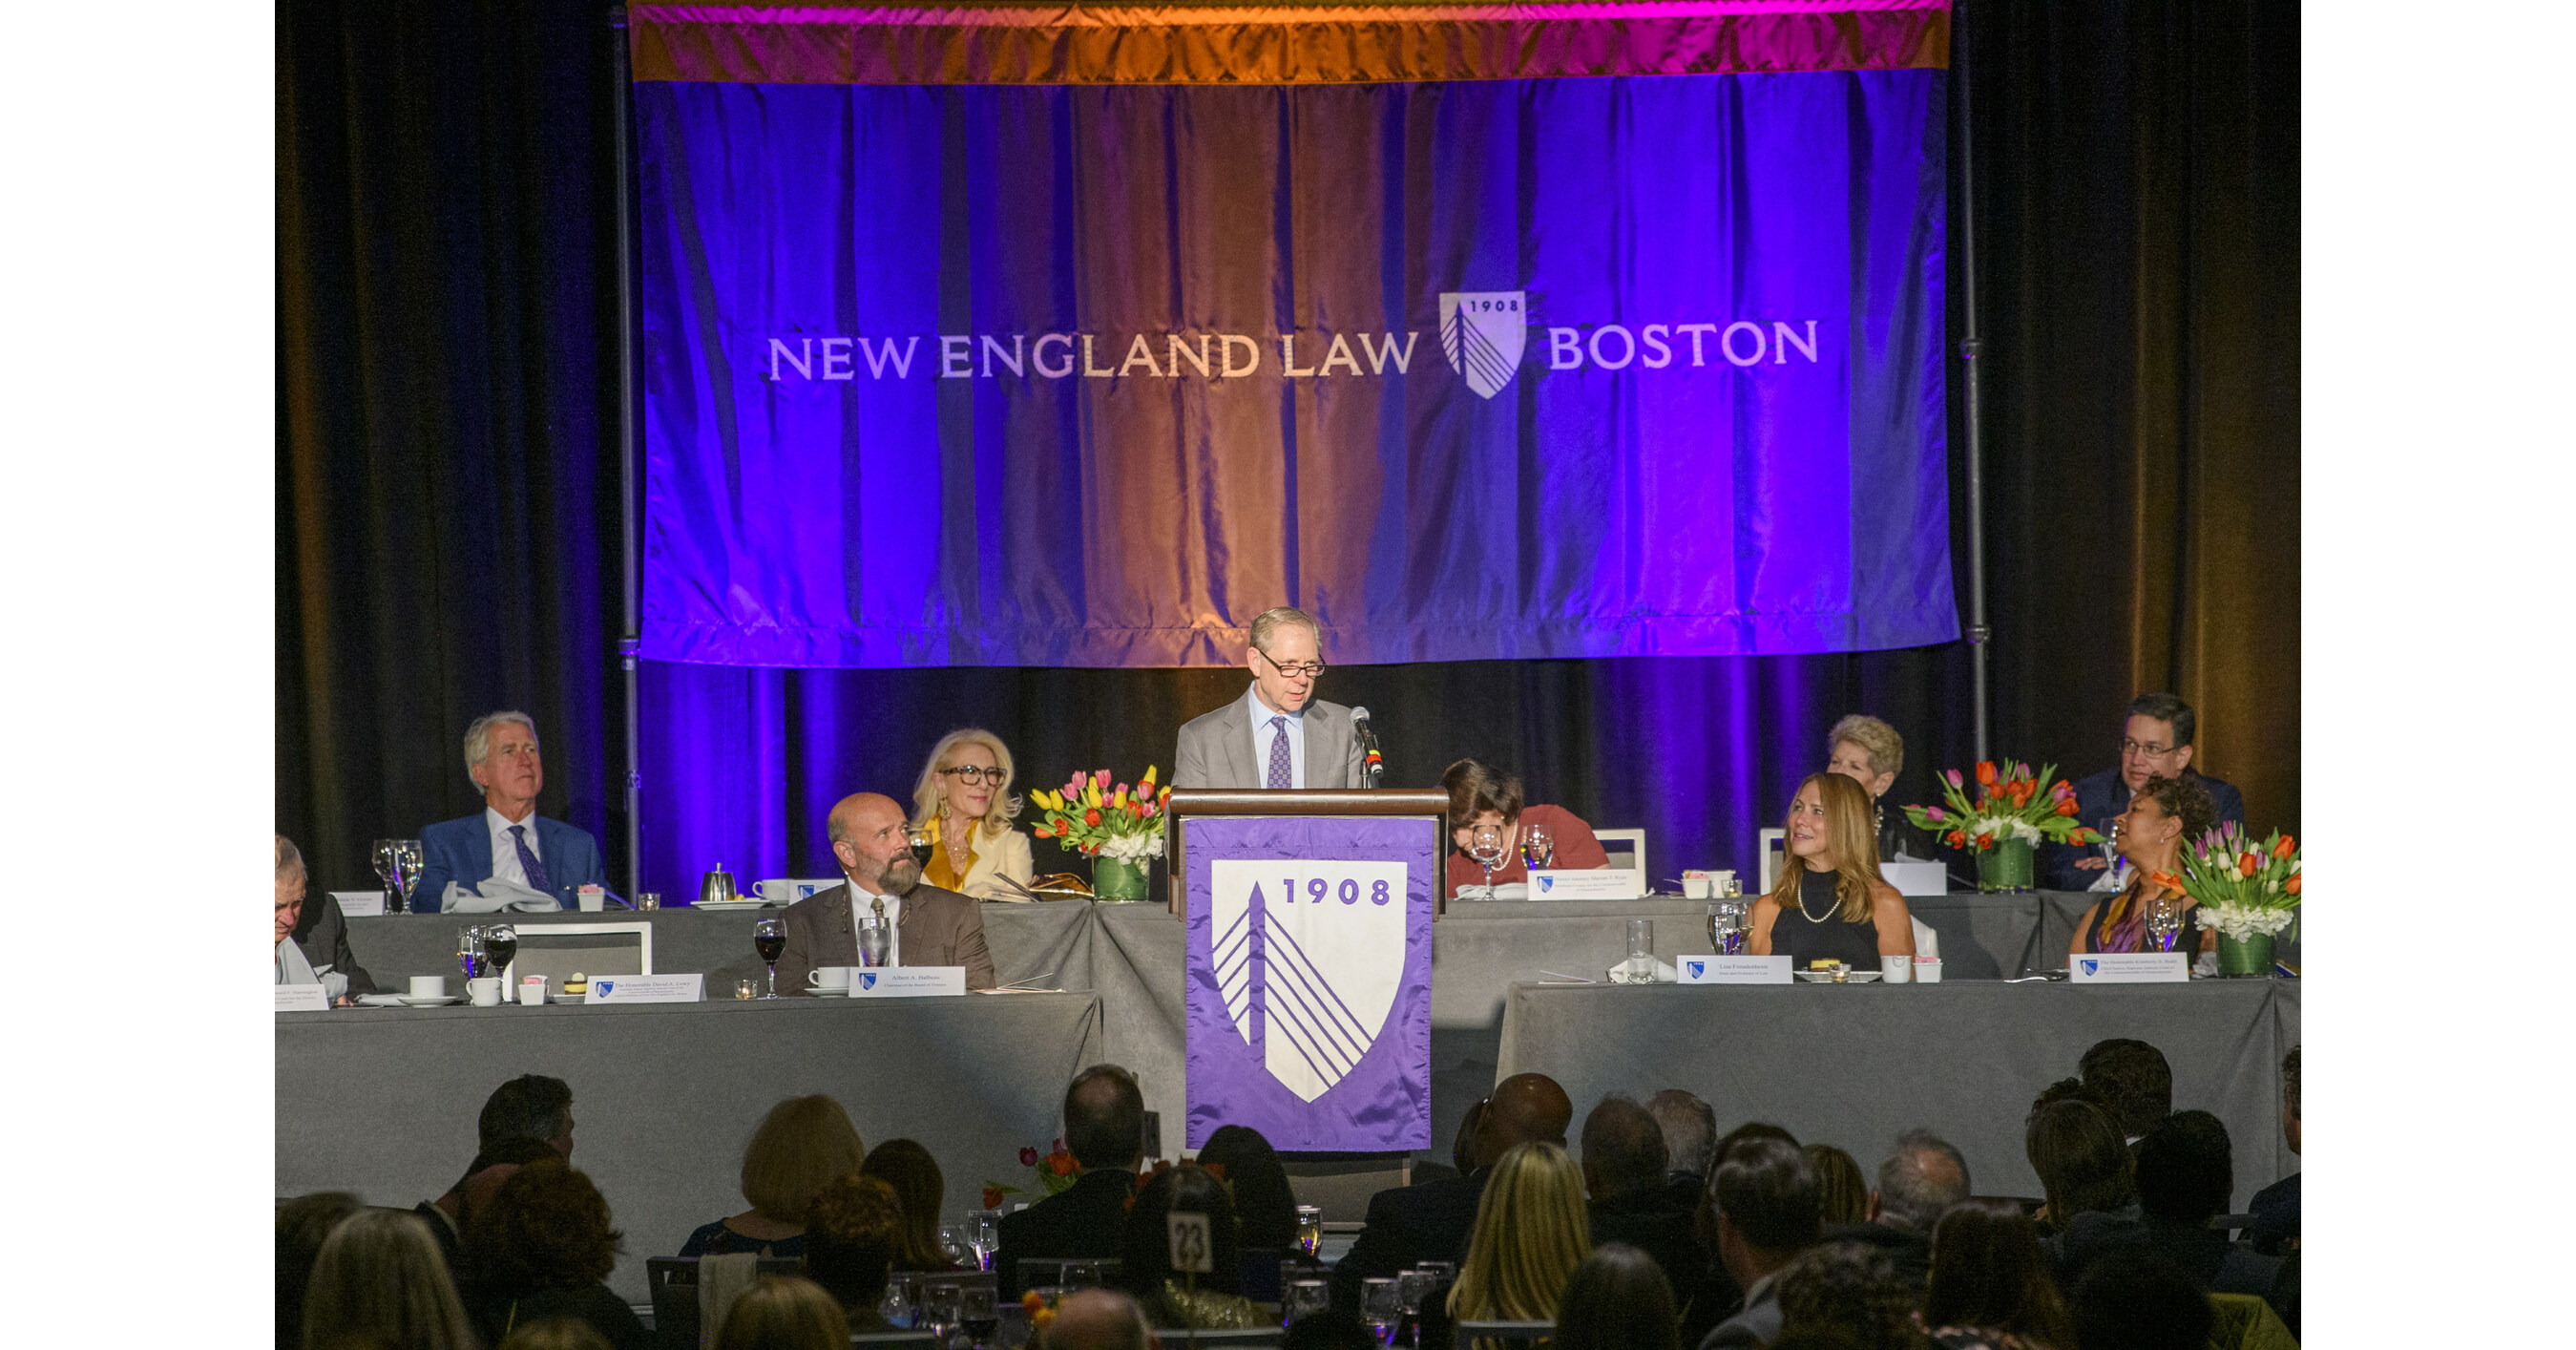 New England Law Boston Law Day Banquet and Barrister's Ball